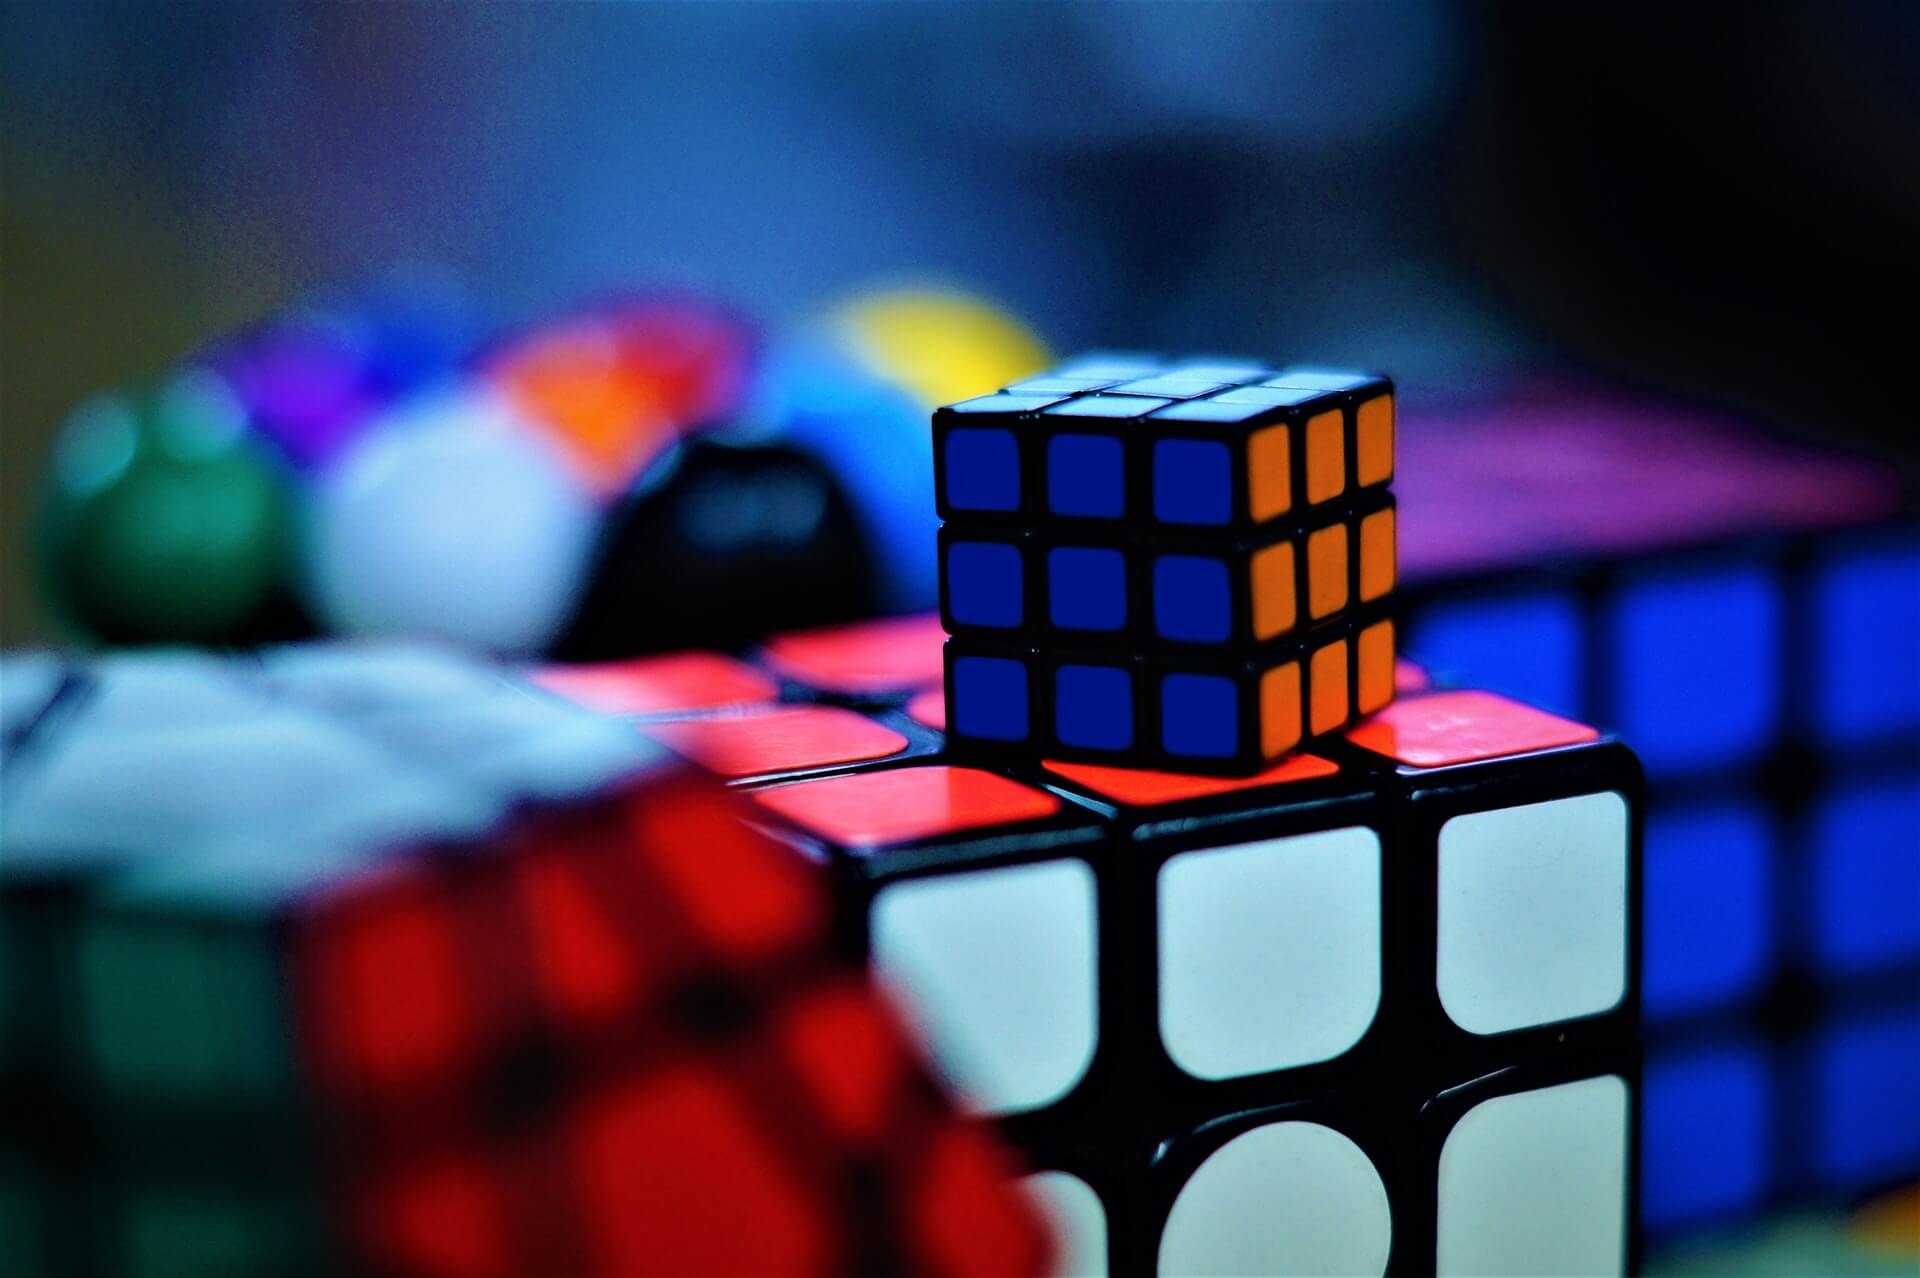 Rubik's cubes stacked on top of each other